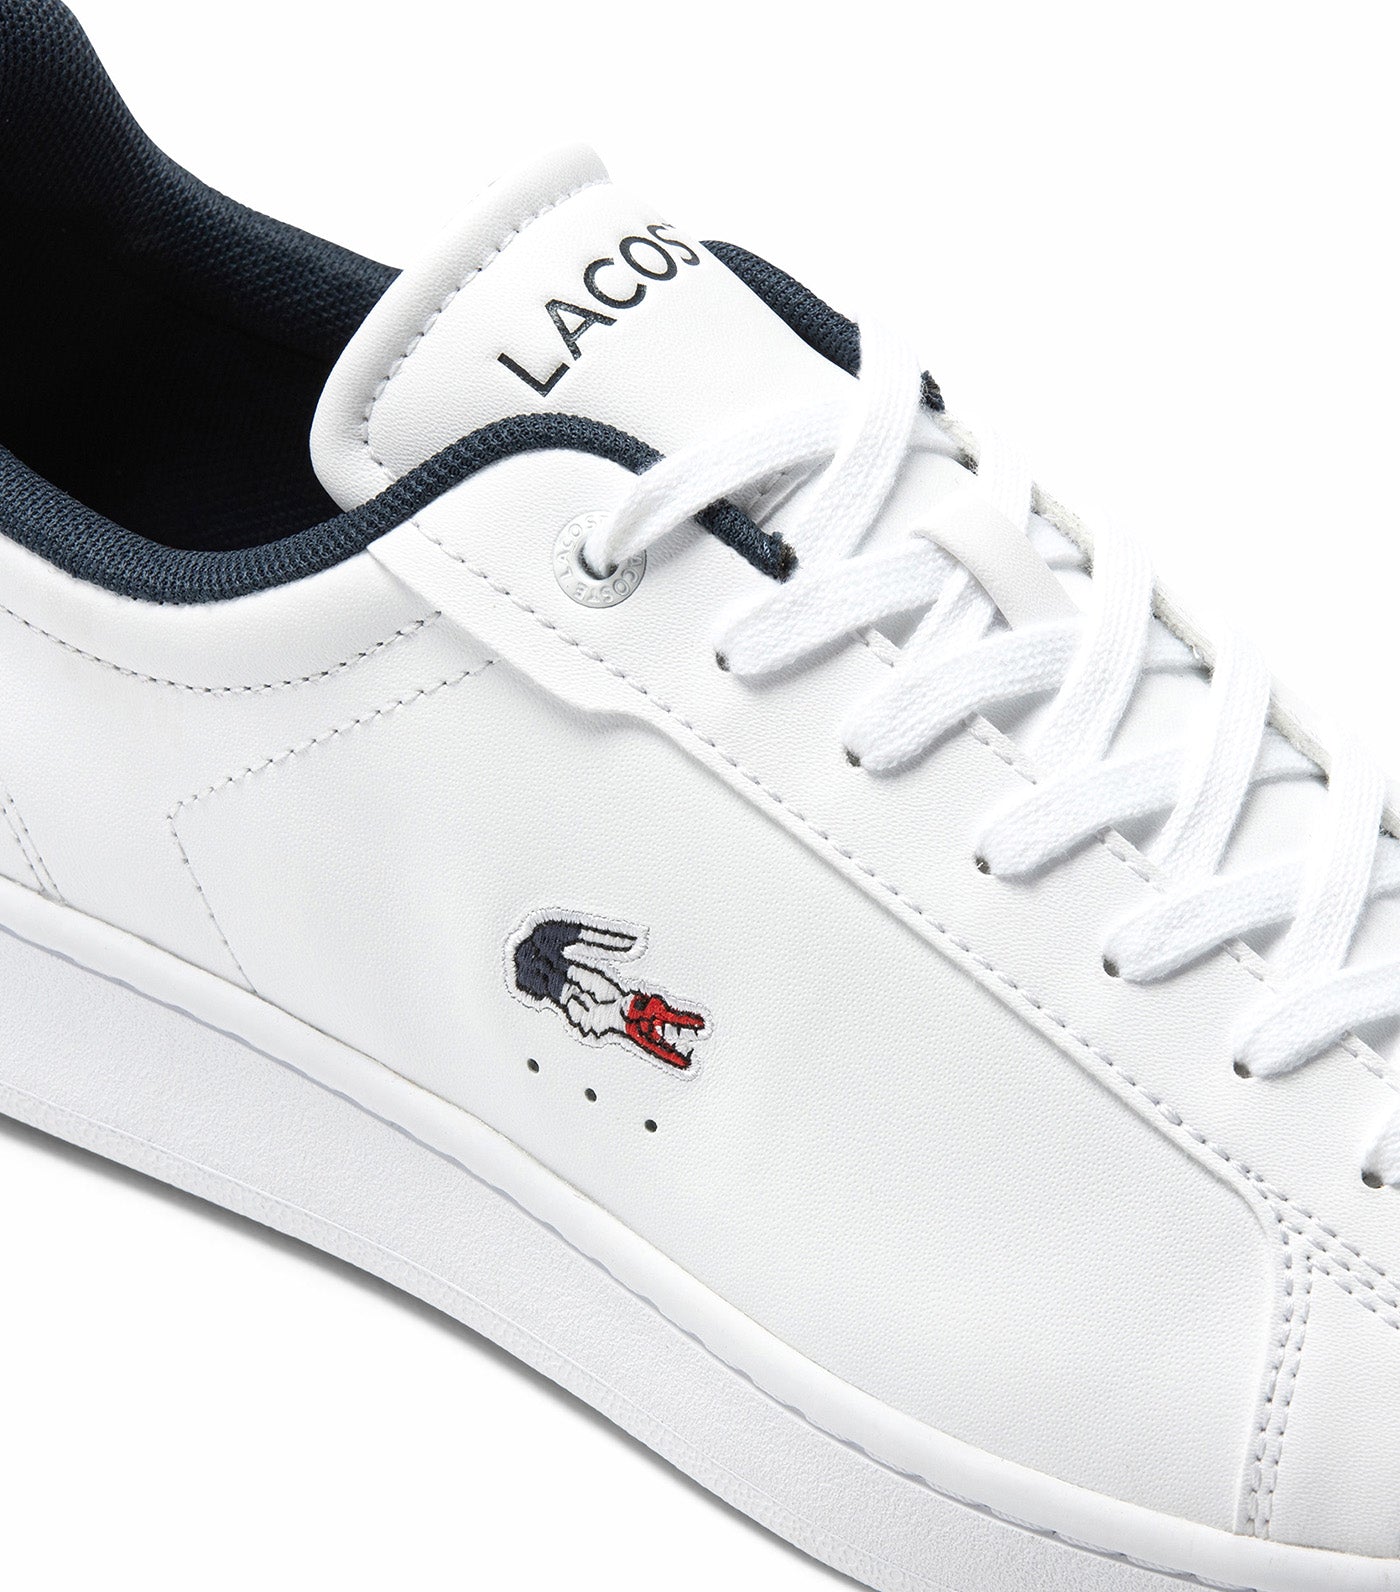 Men's Lacoste Carnaby Pro Leather Tricolour Trainers White/Navy/Red